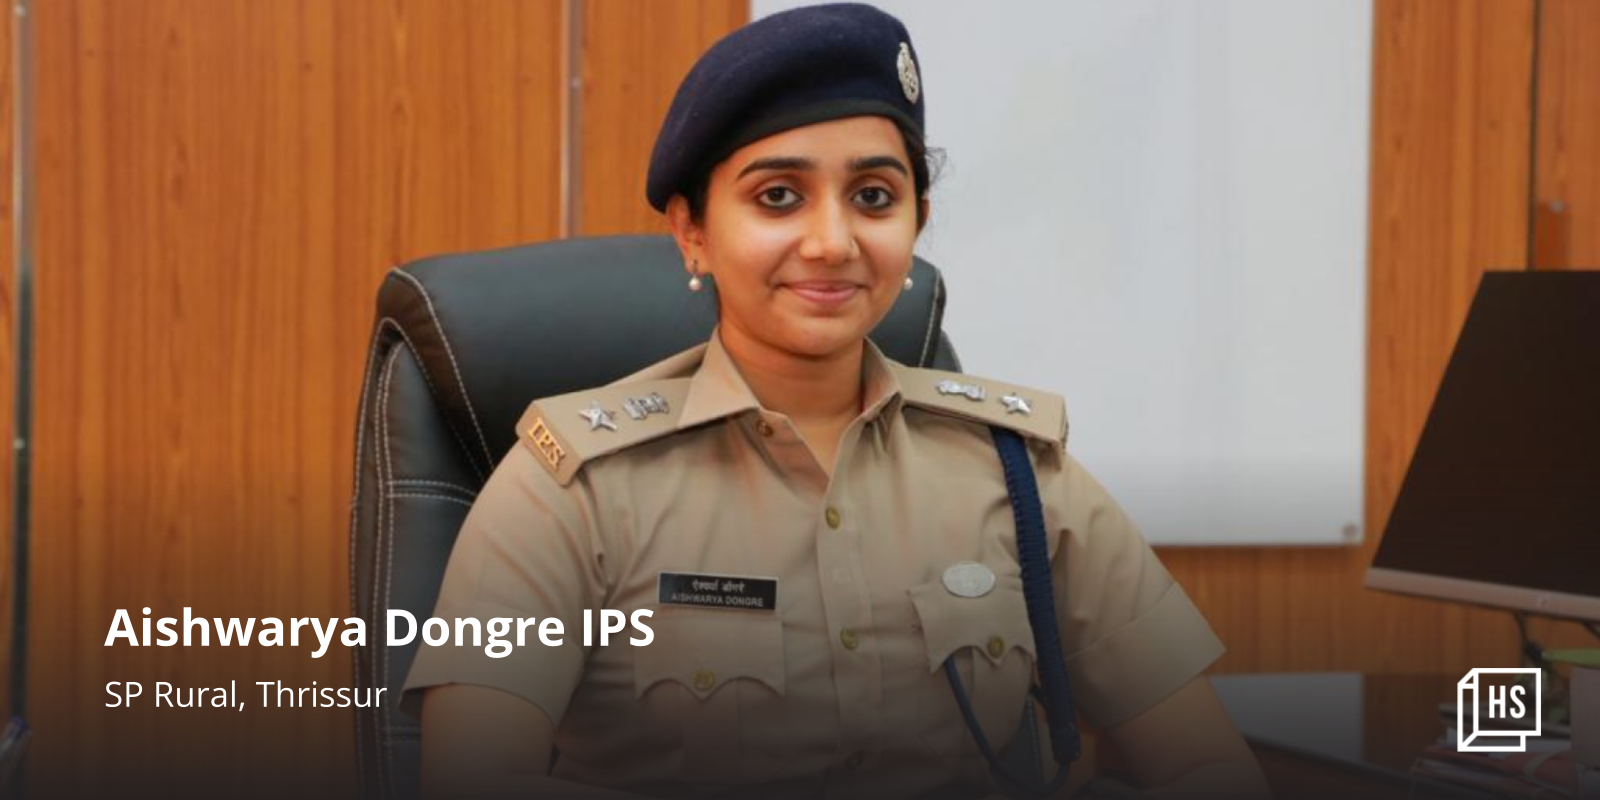 IPS officer Aishwarya Dongre believes we must be the change we ...